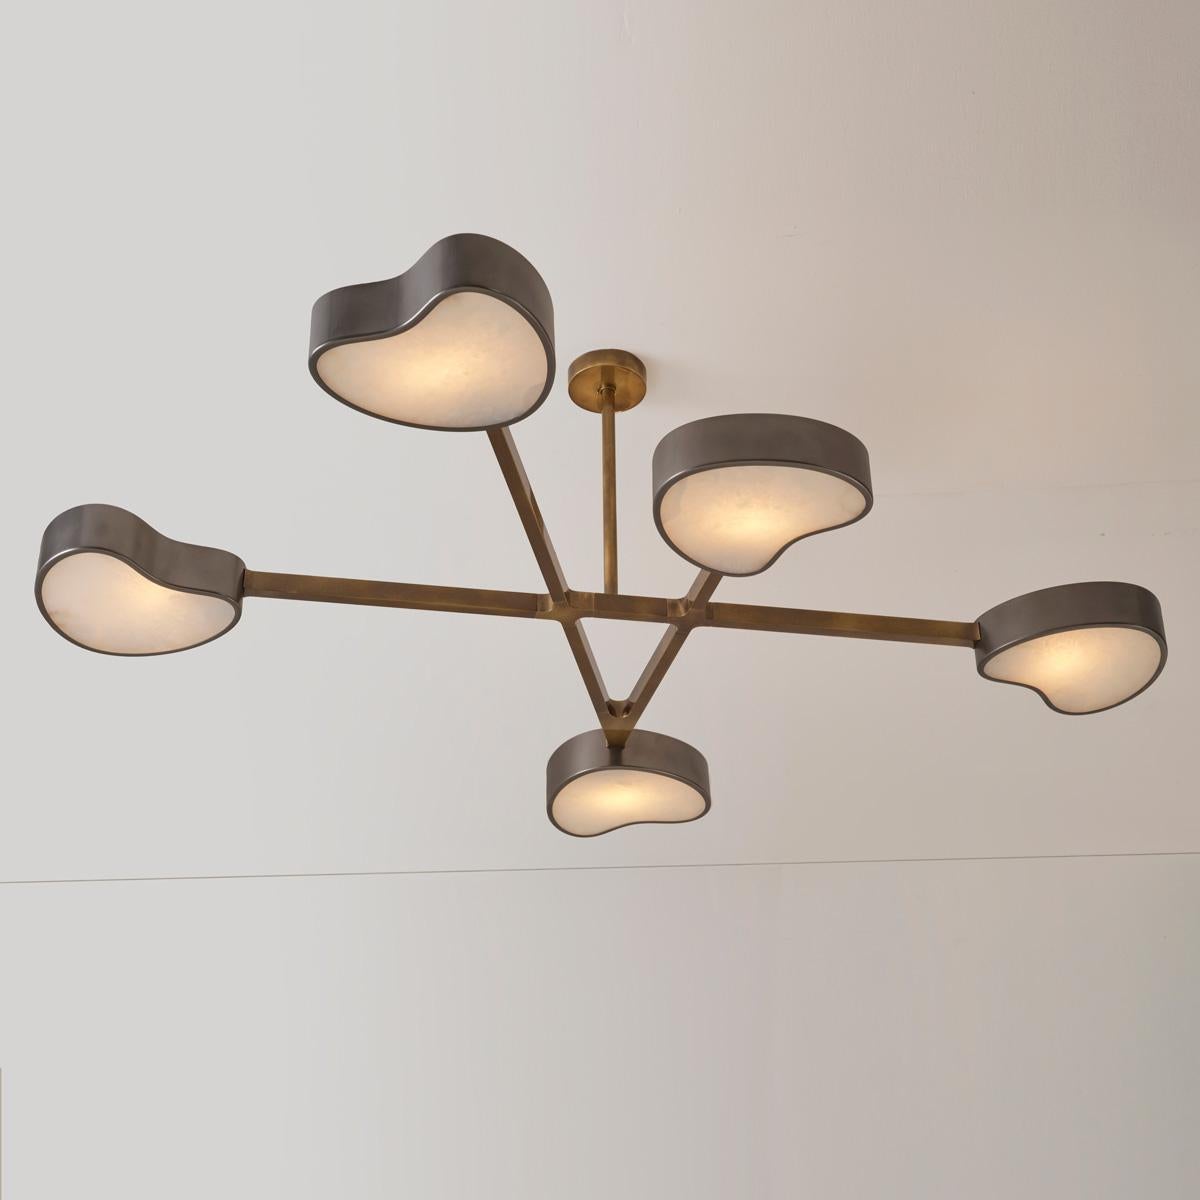 Modern Cuore N.5 Ceiling Light by Gaspare Asaro. Peltro and Bronze Finish For Sale